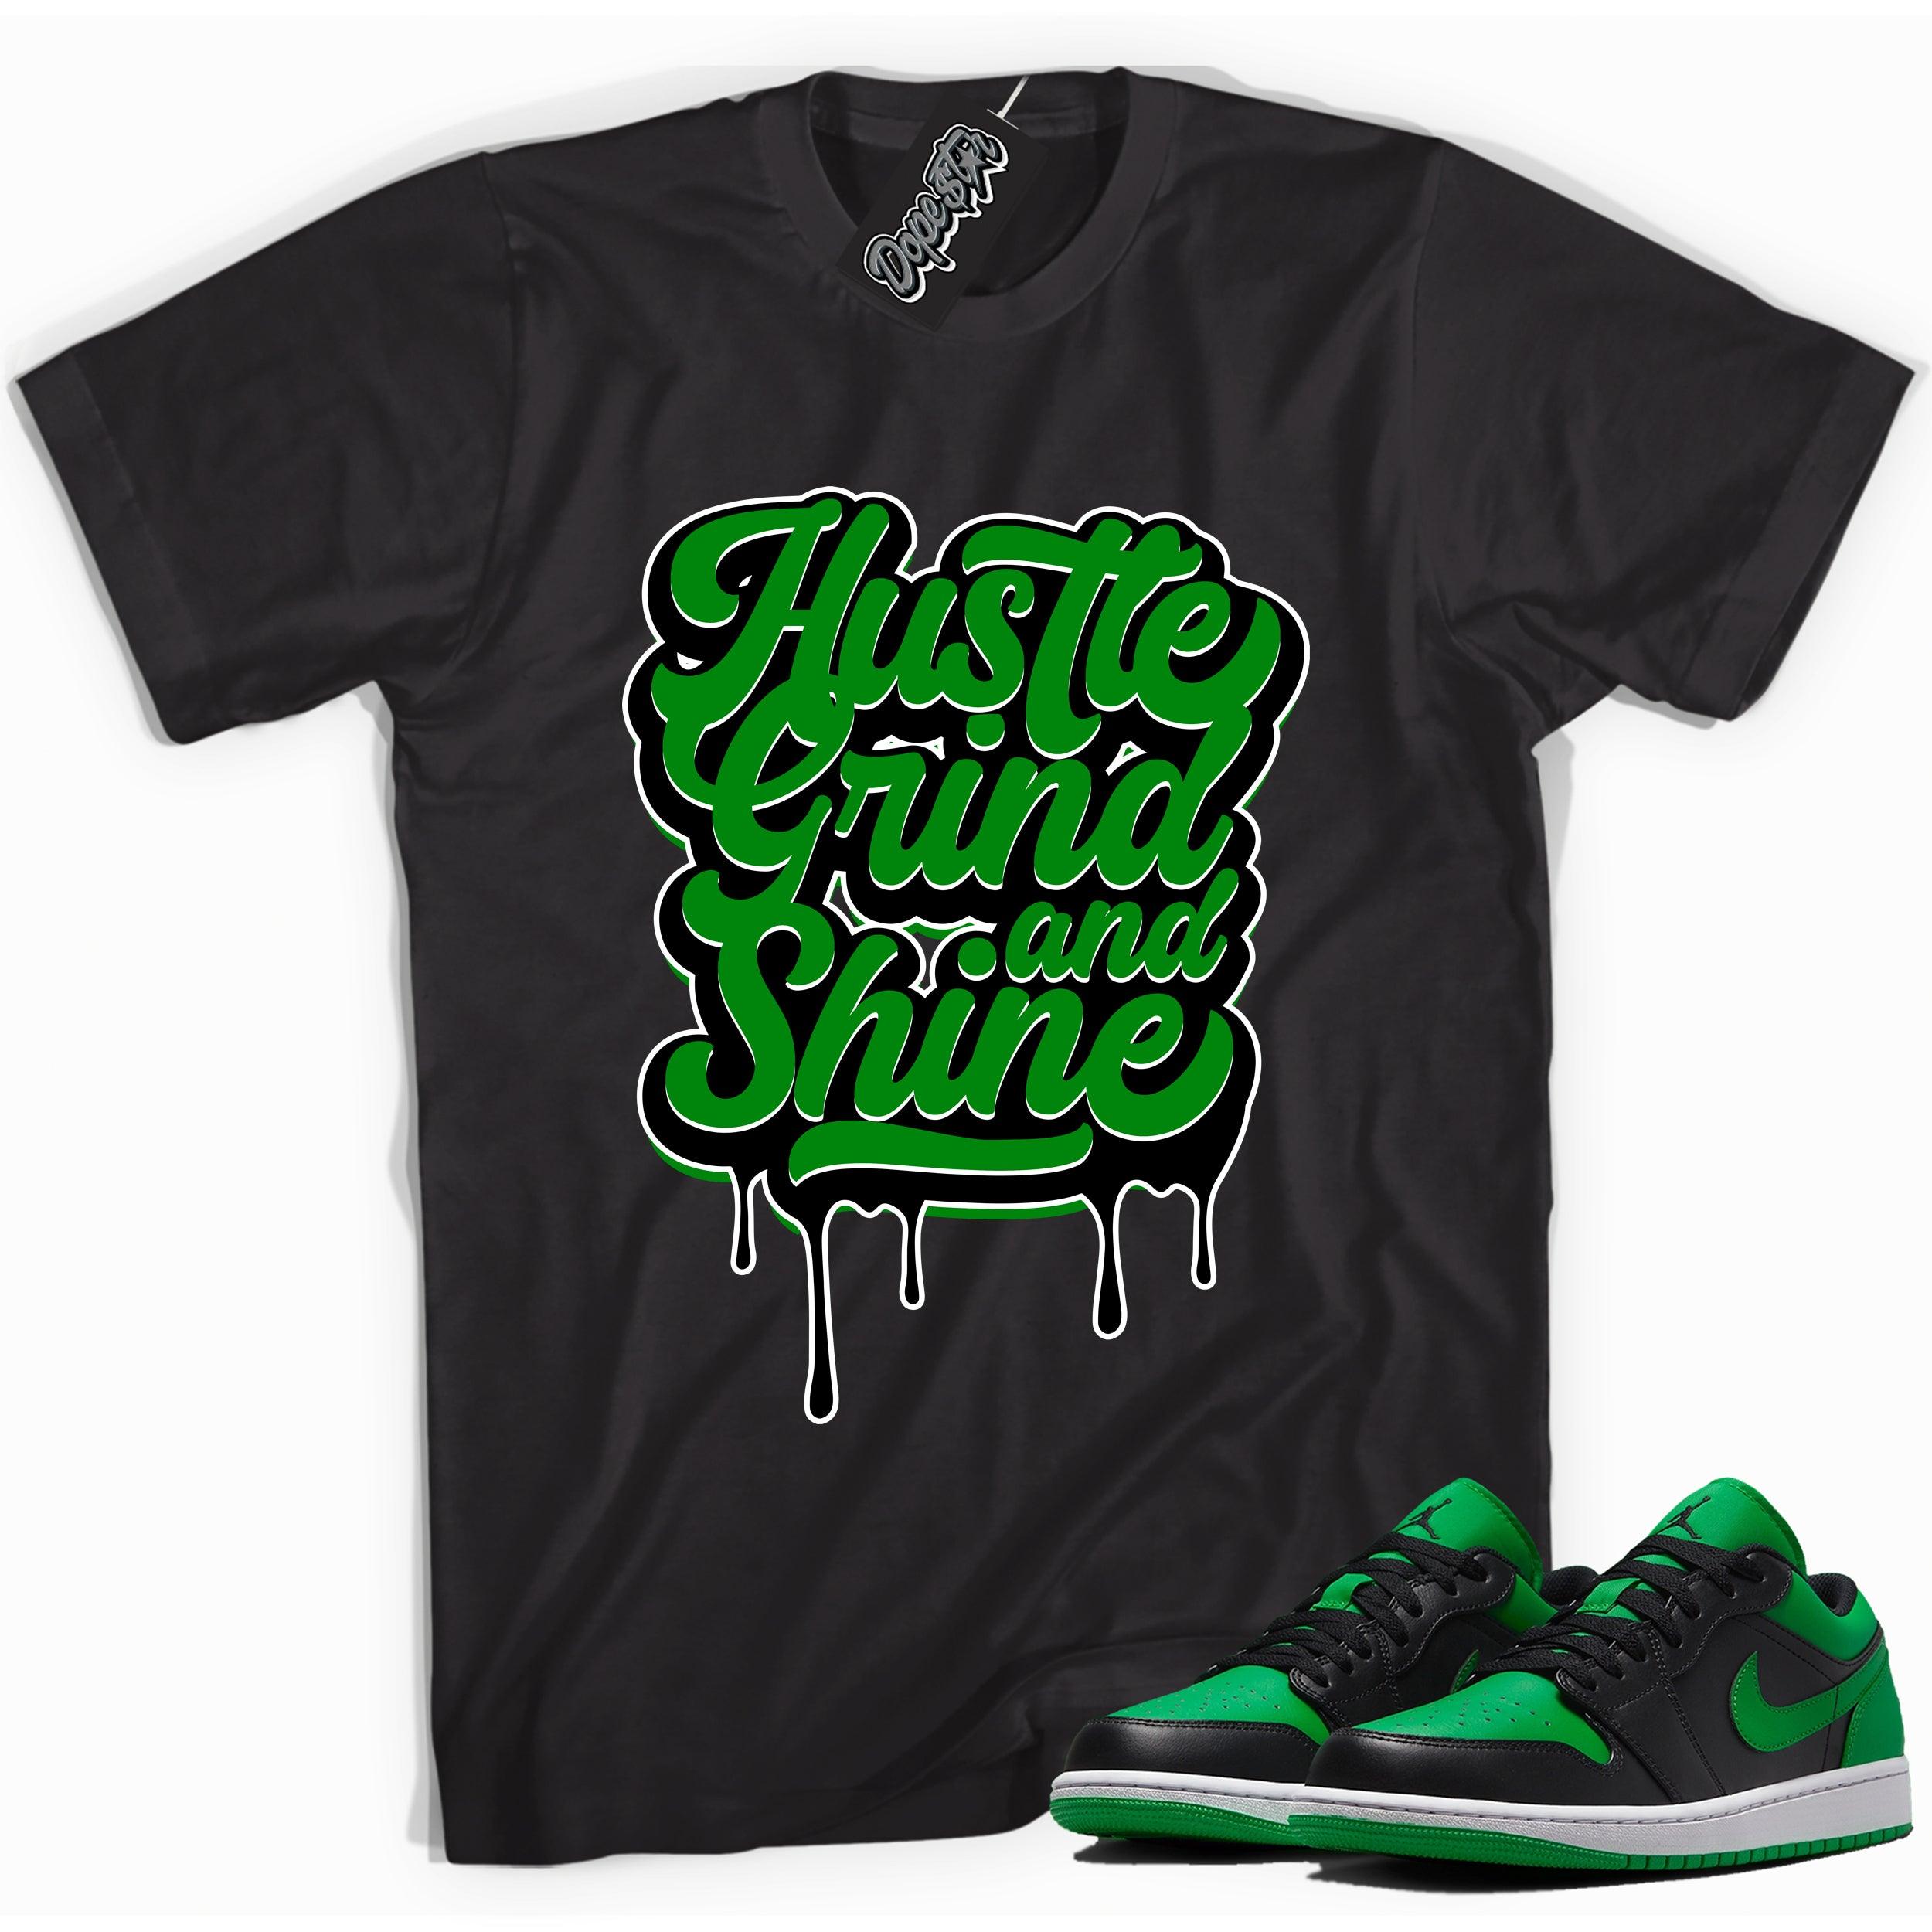 Cool black graphic tee with 'Hustle Grind & Shine' print, that perfectly matches Air Jordan 1 Low Lucky Green sneakers